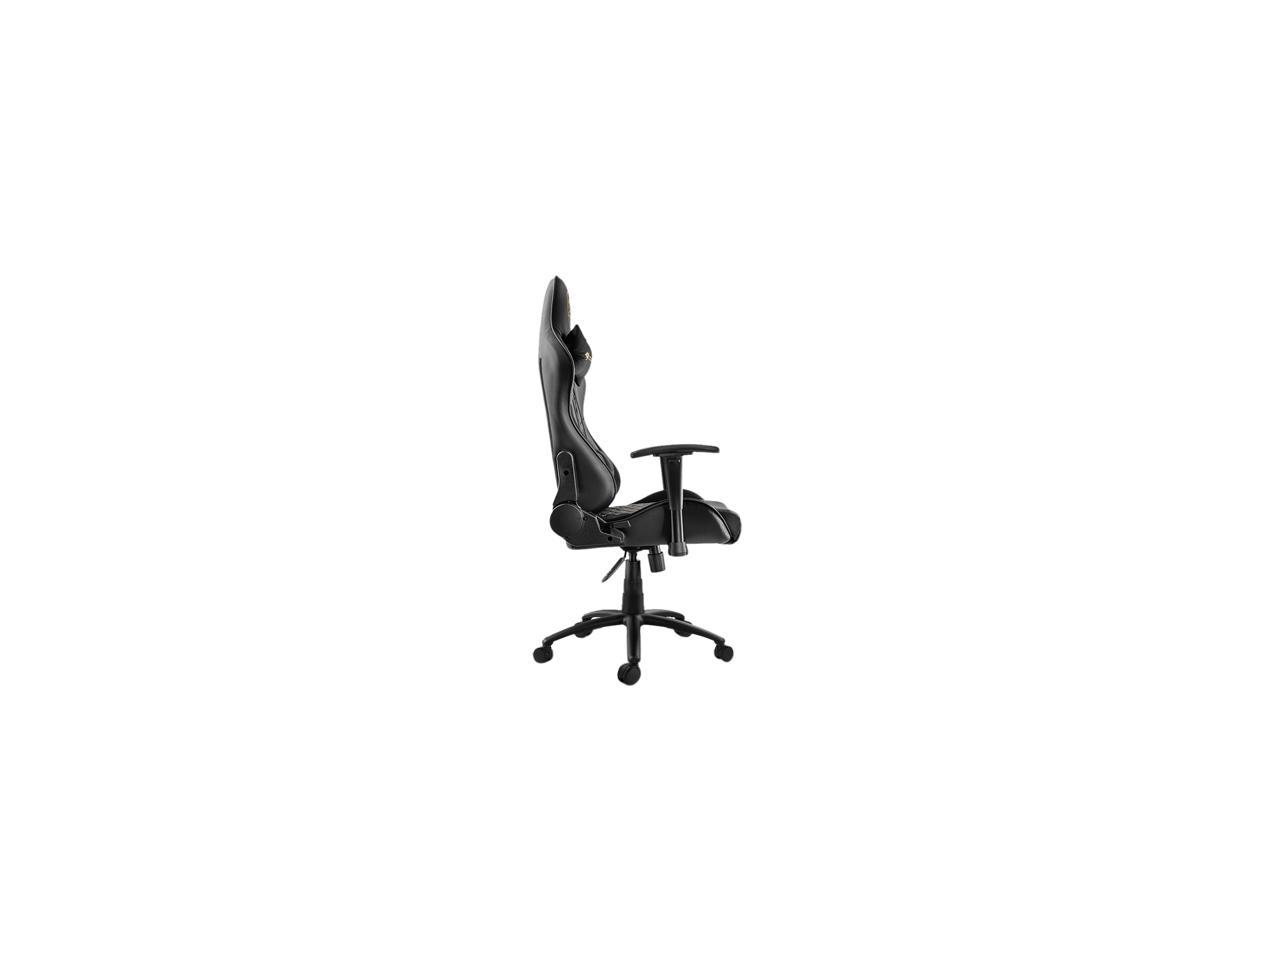 Cougar Outrider Royal Comfort Best Gaming Chair in Bahrain